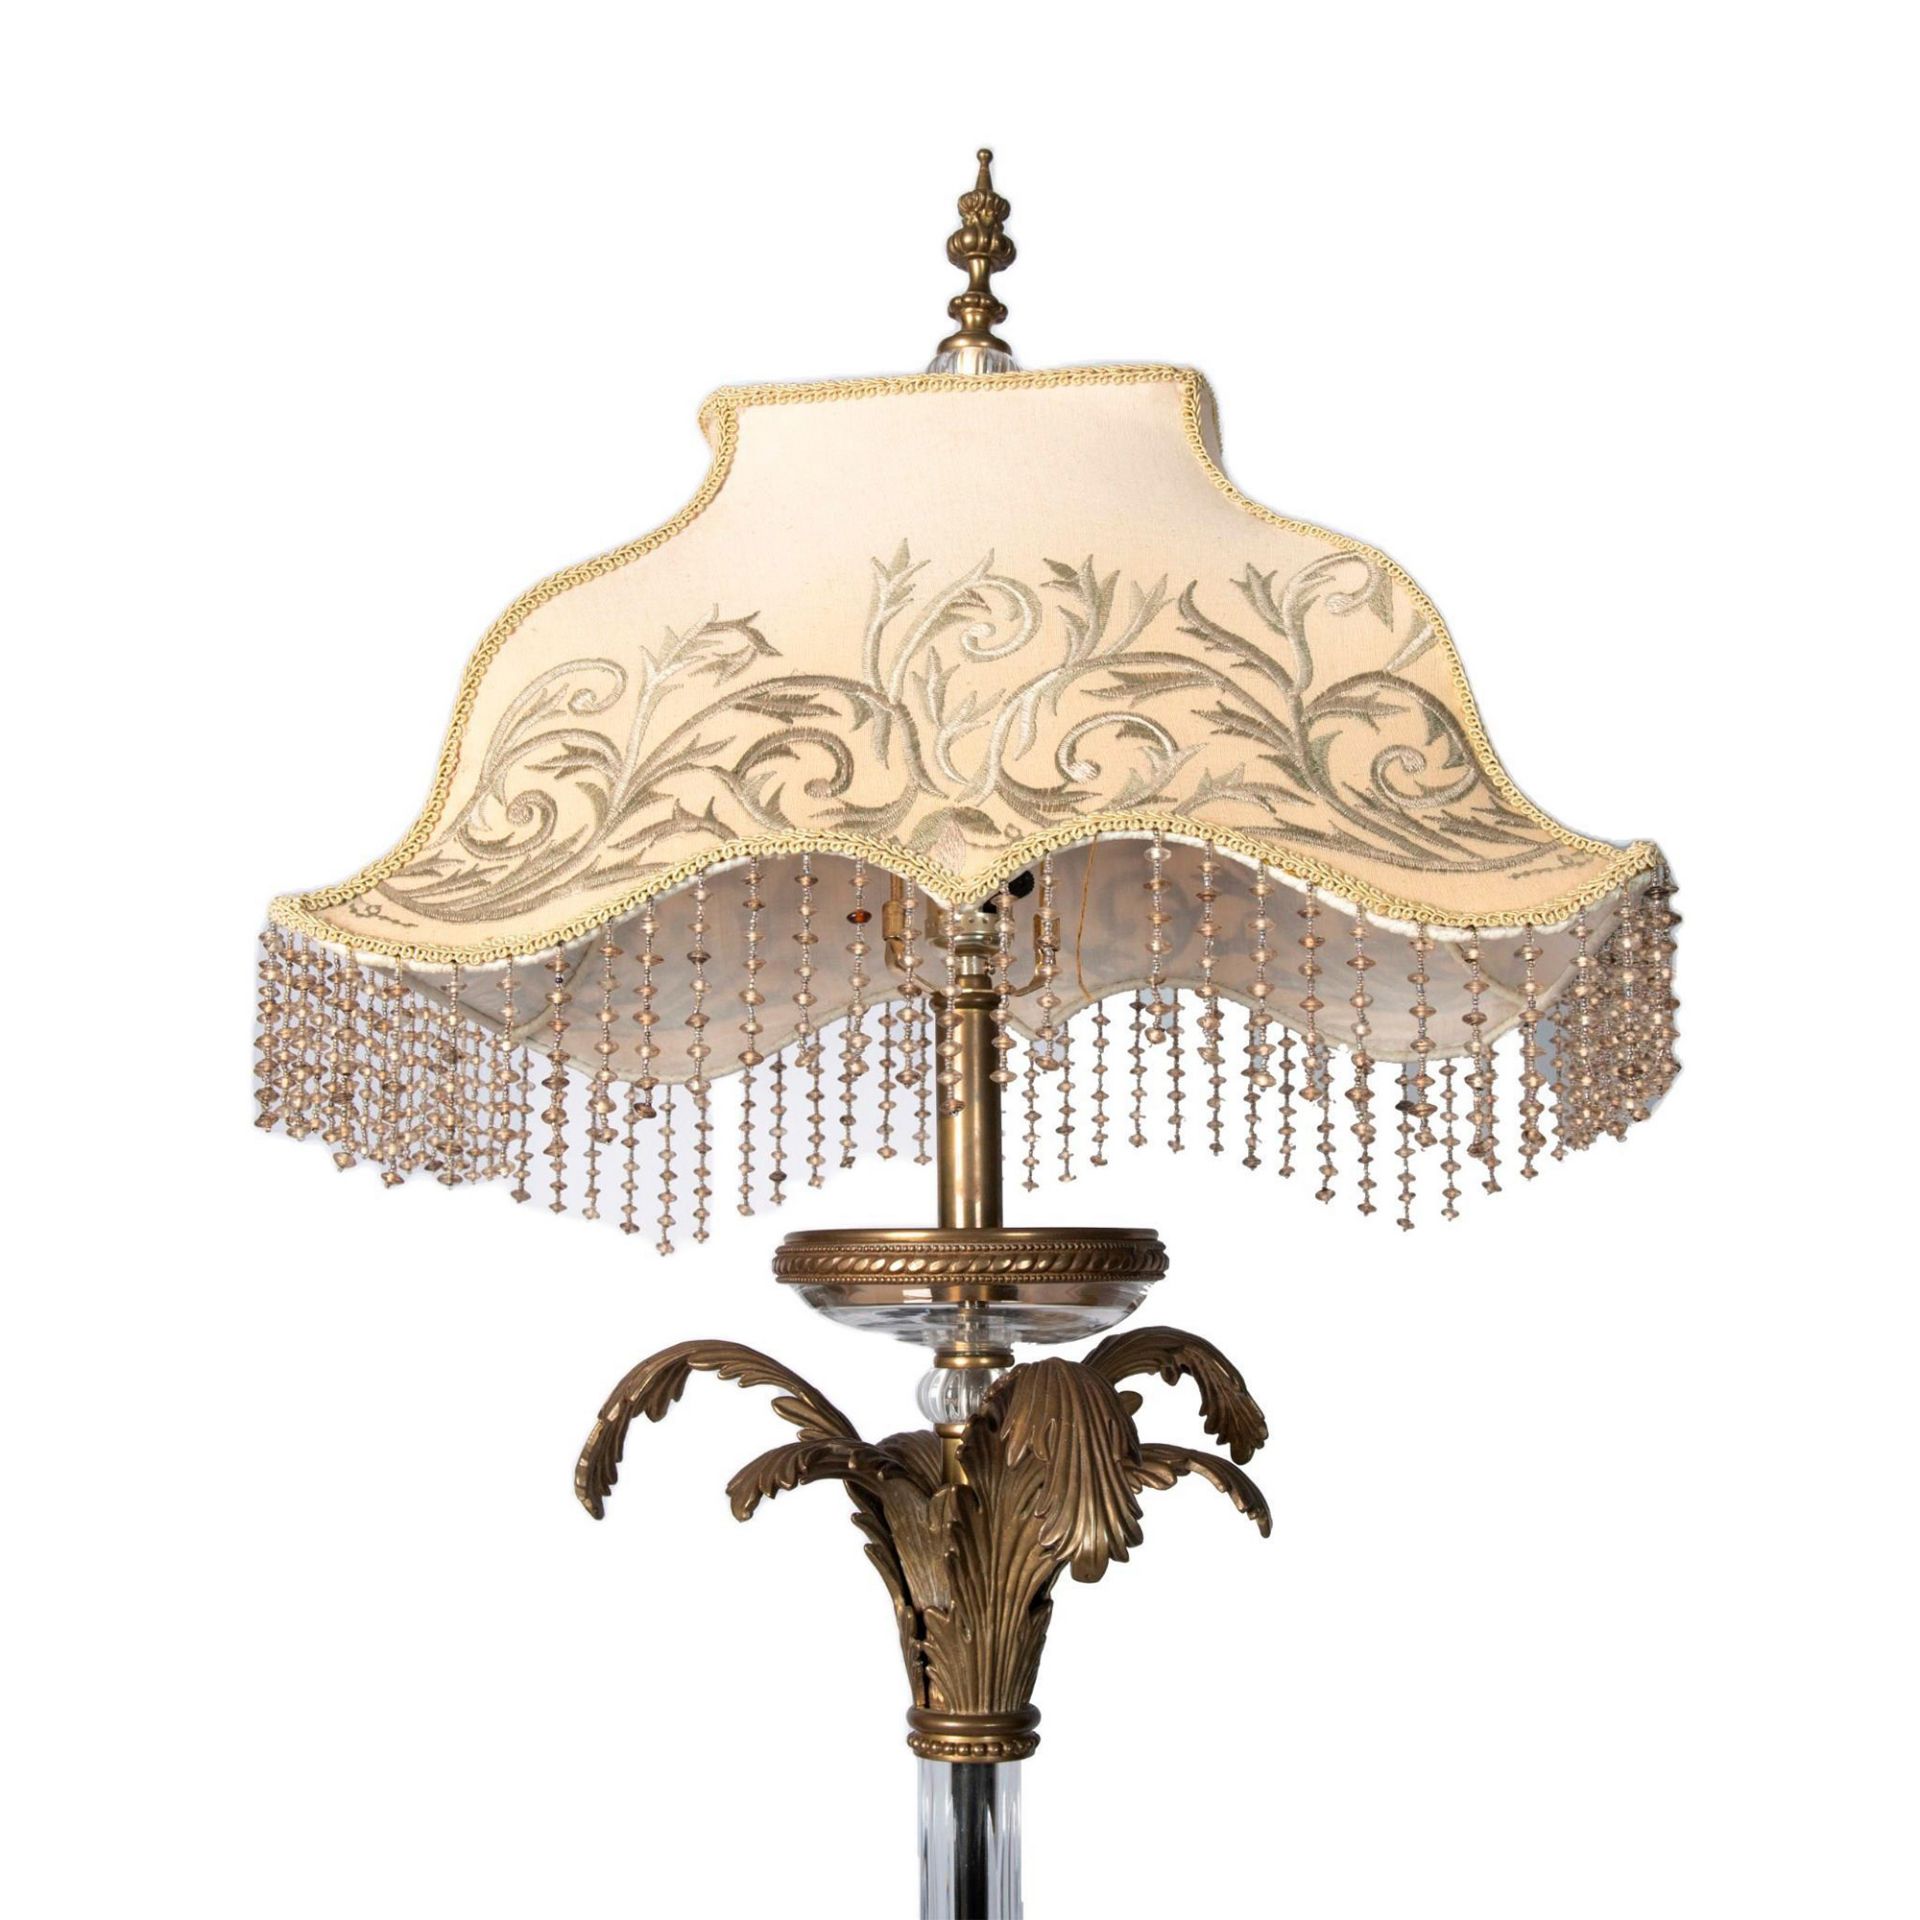 Baroque Style Brass and Glass Ornate Floor Lamp - Image 2 of 9